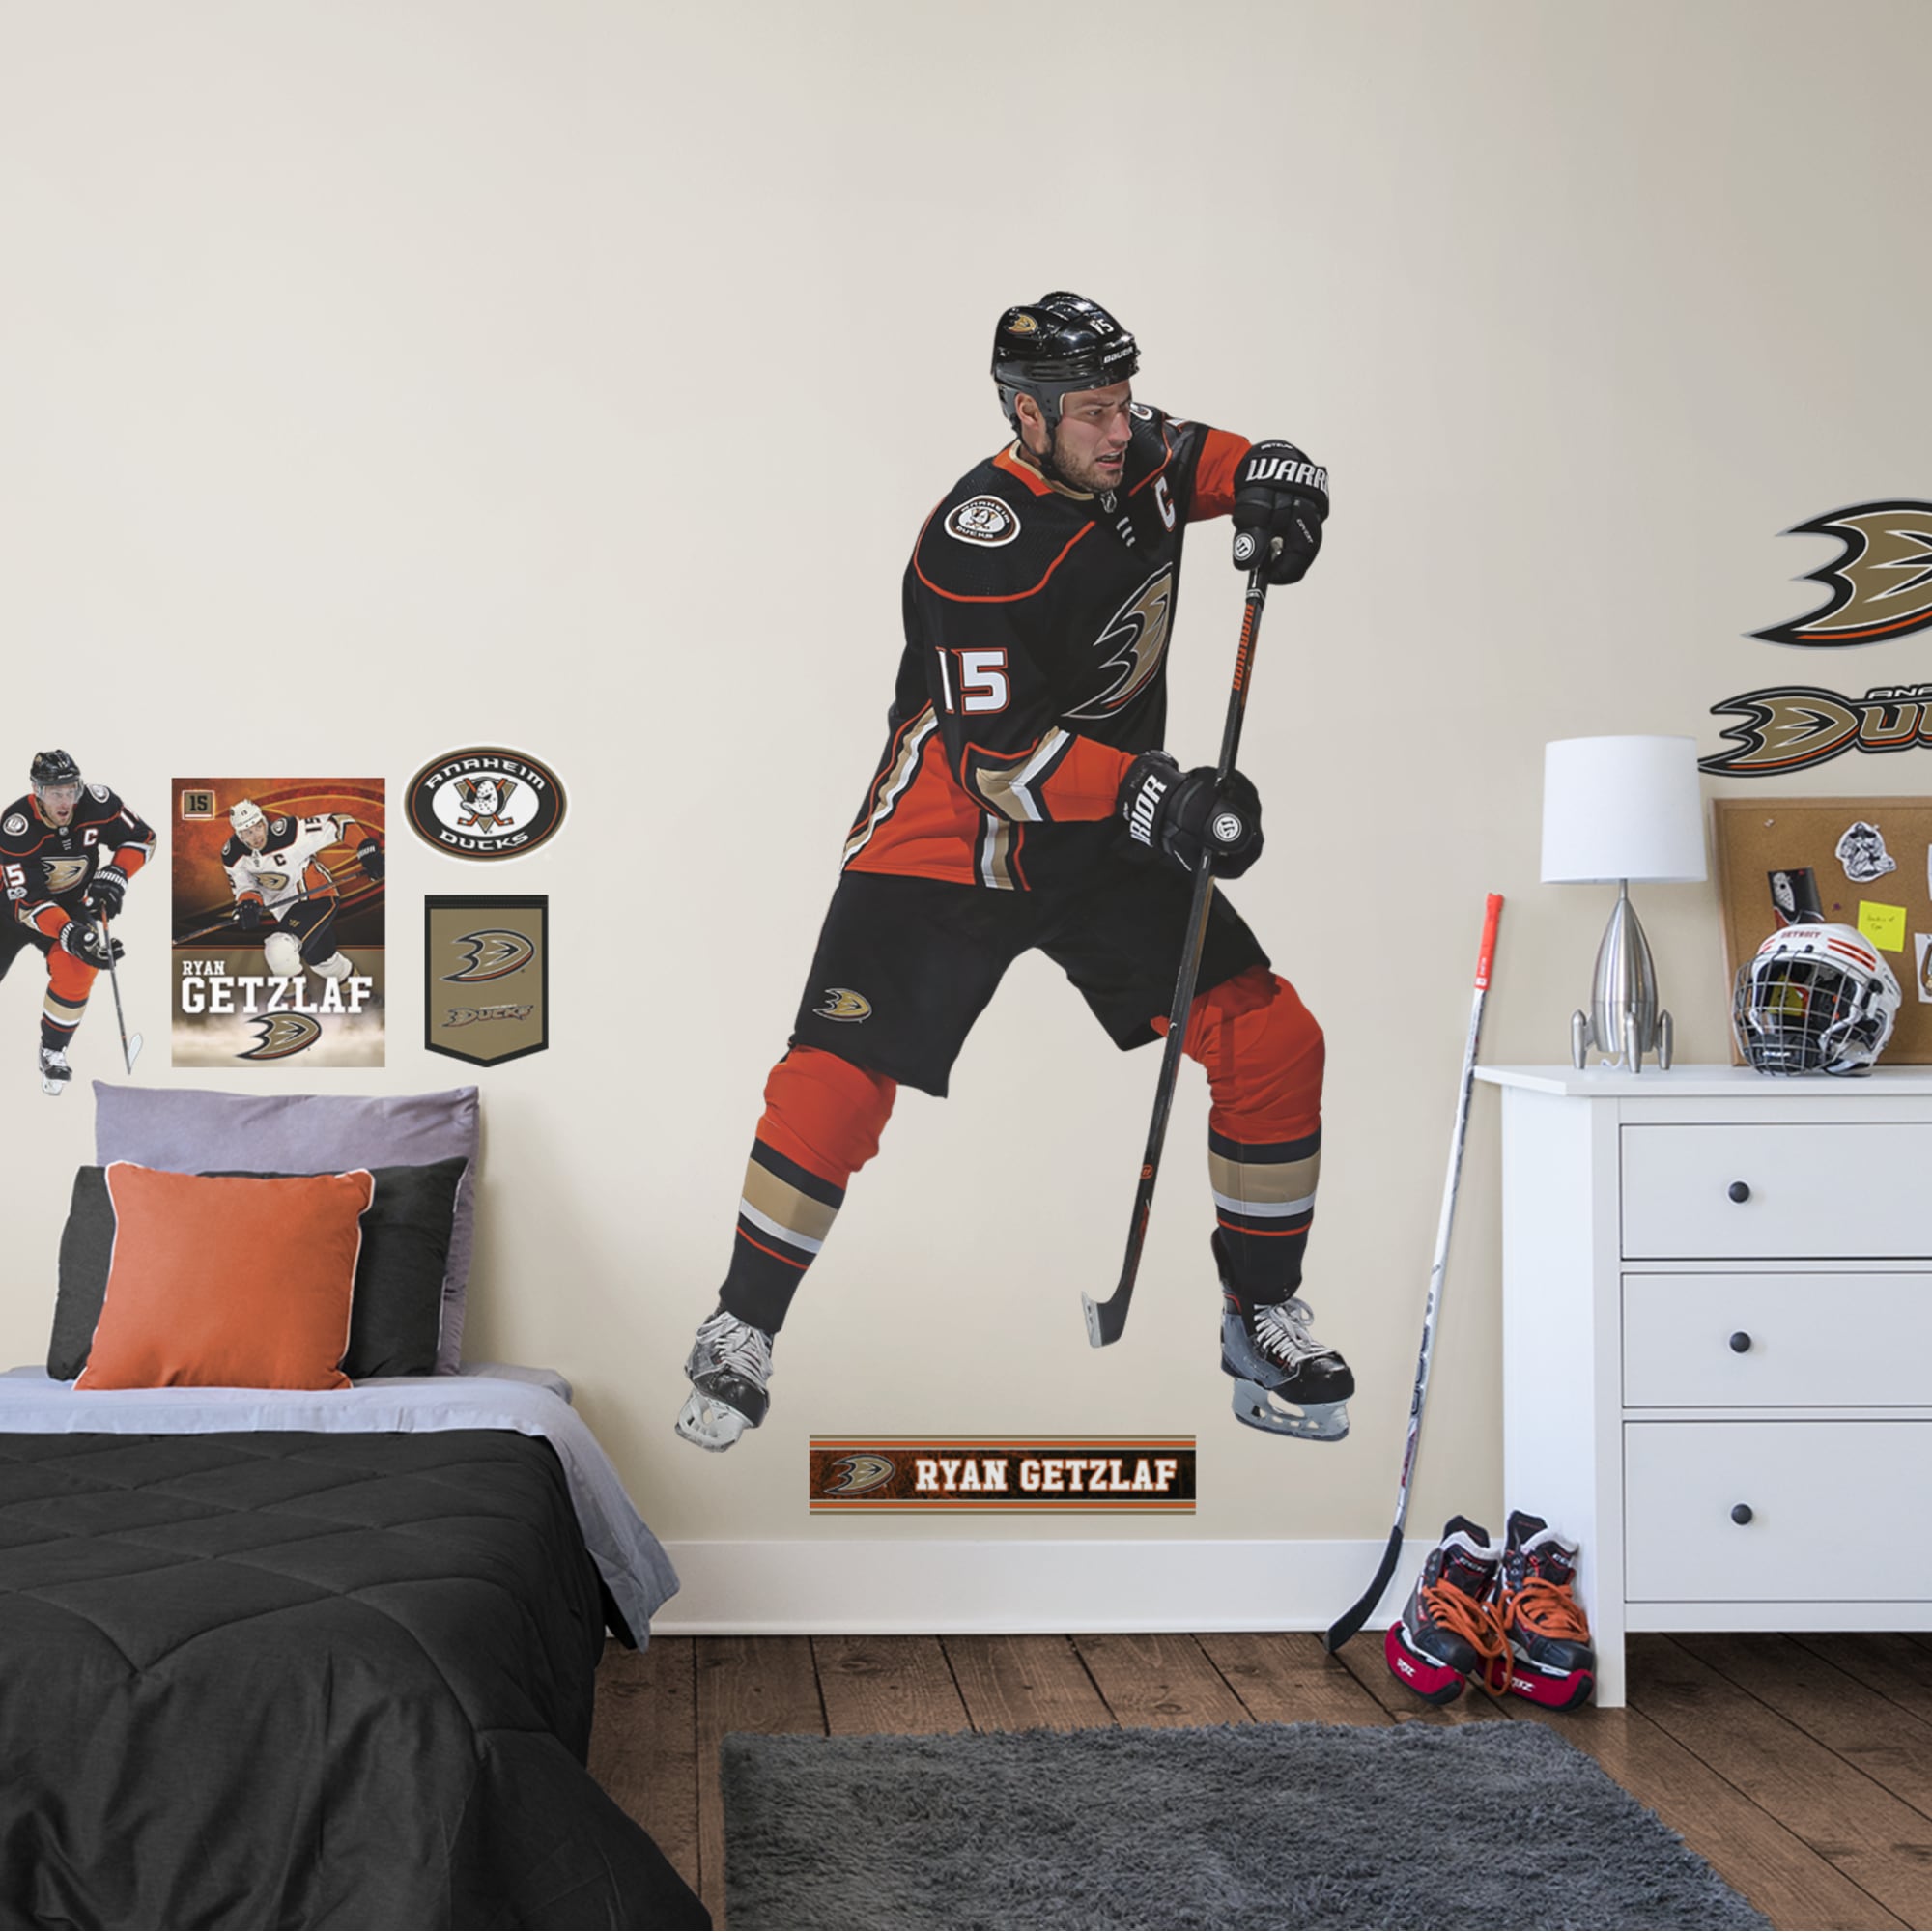 Ryan Getzlaf for Anaheim Ducks - Officially Licensed NHL Removable Wall Decal Life-Size Athlete + 9 Decals (45"W x 78"H) by Fath